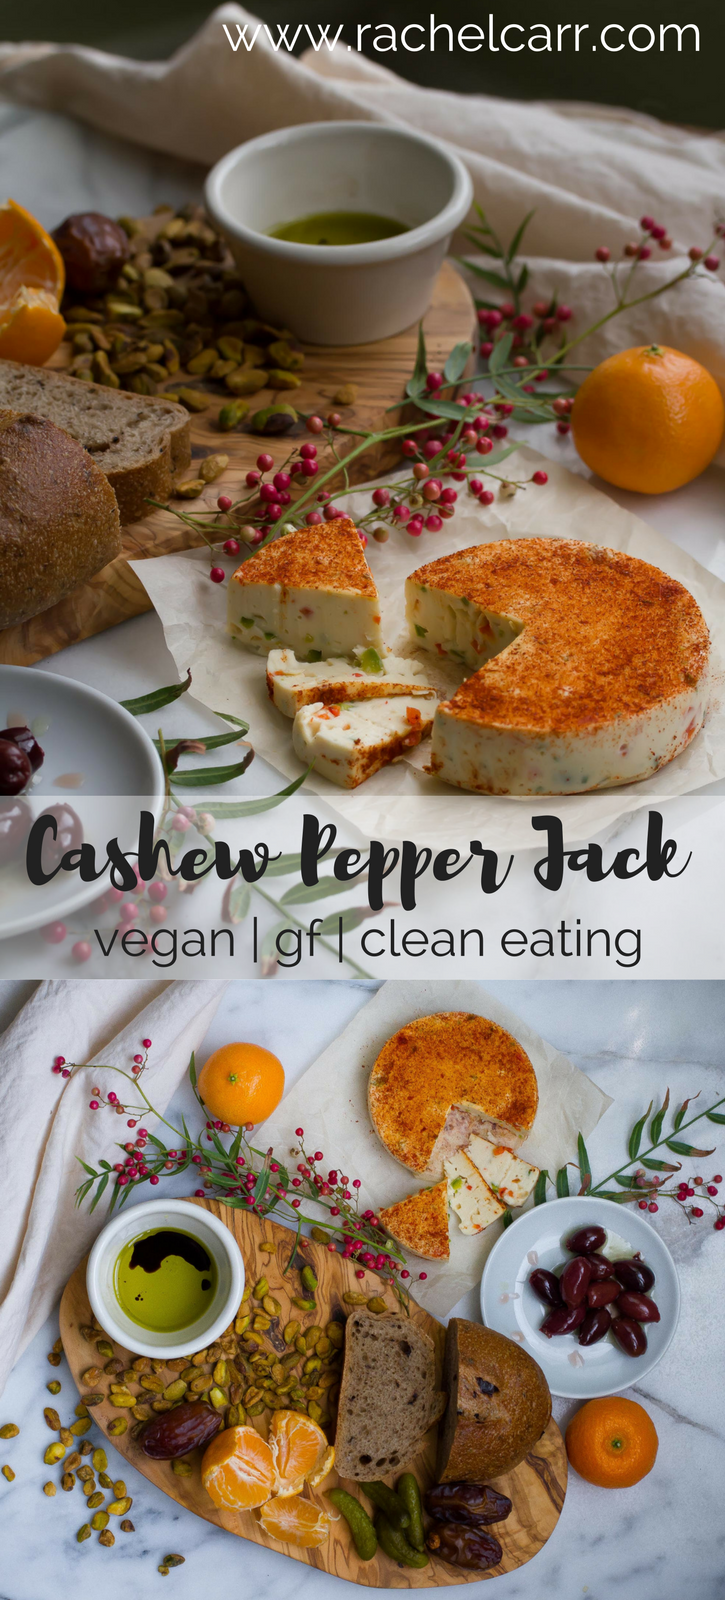 Vegan cheeseboard with homemade cashew papper jack-great for holiday entertaining!